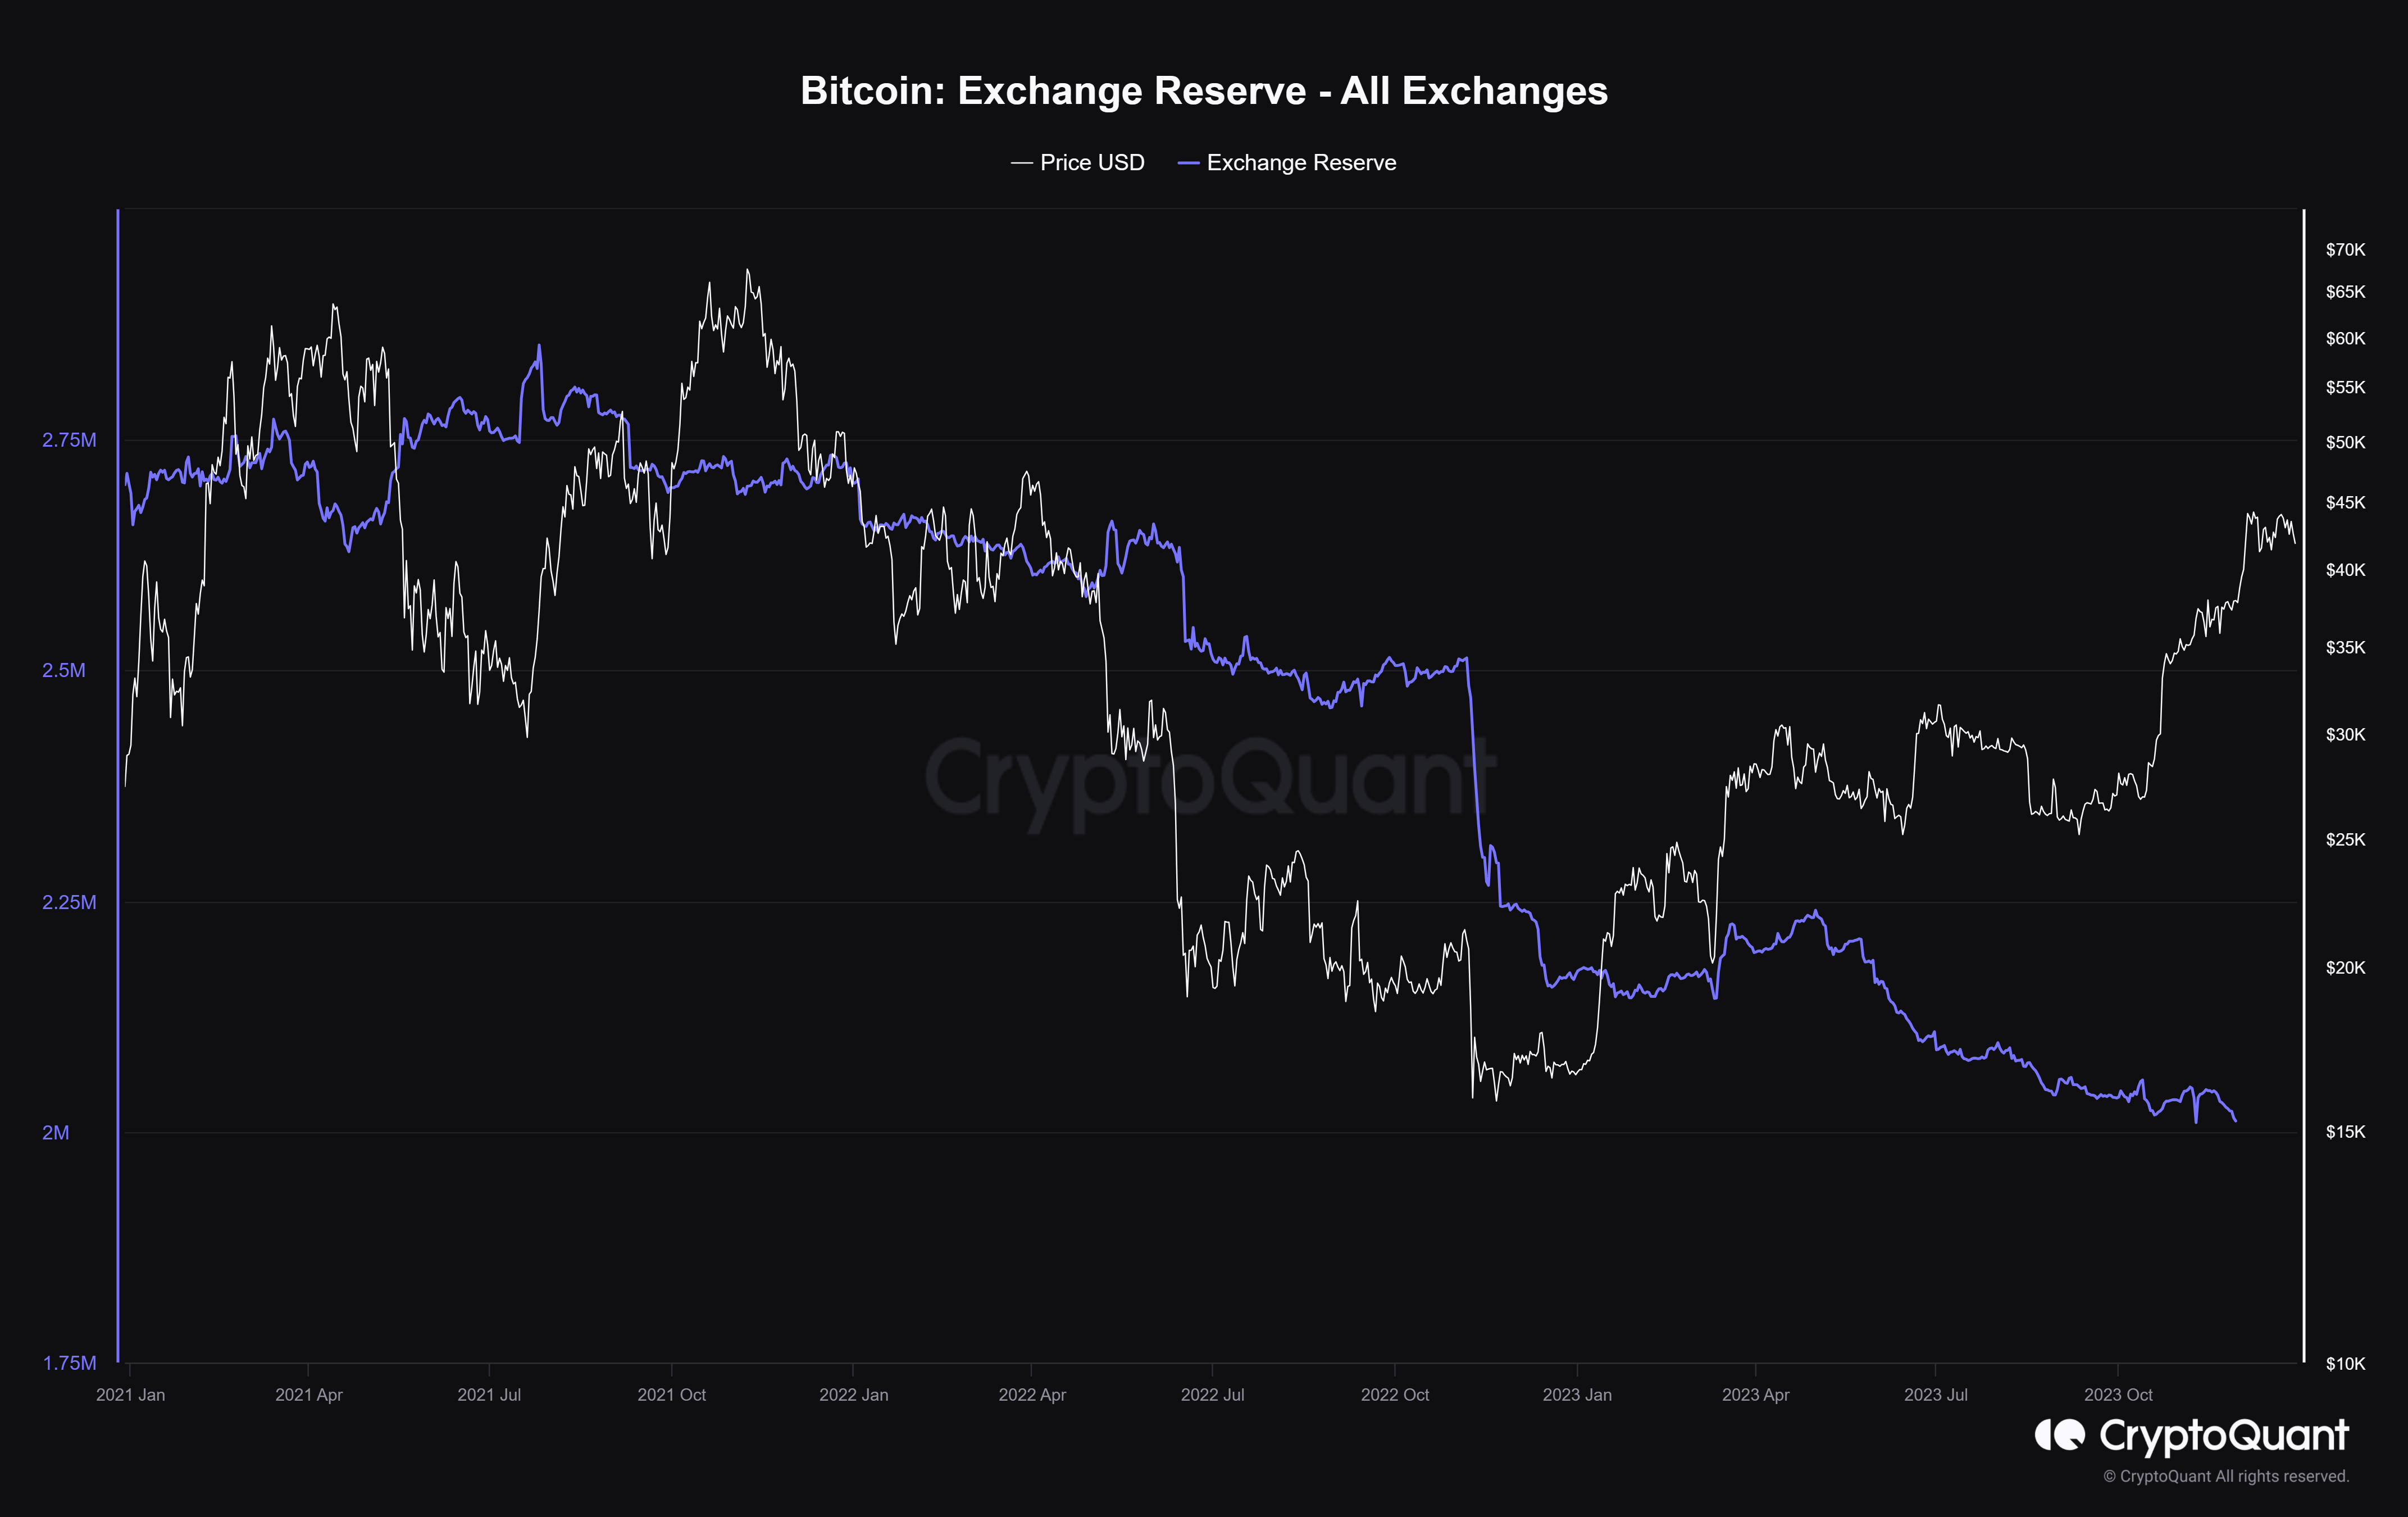 Bitcoin price against its exchange reserves